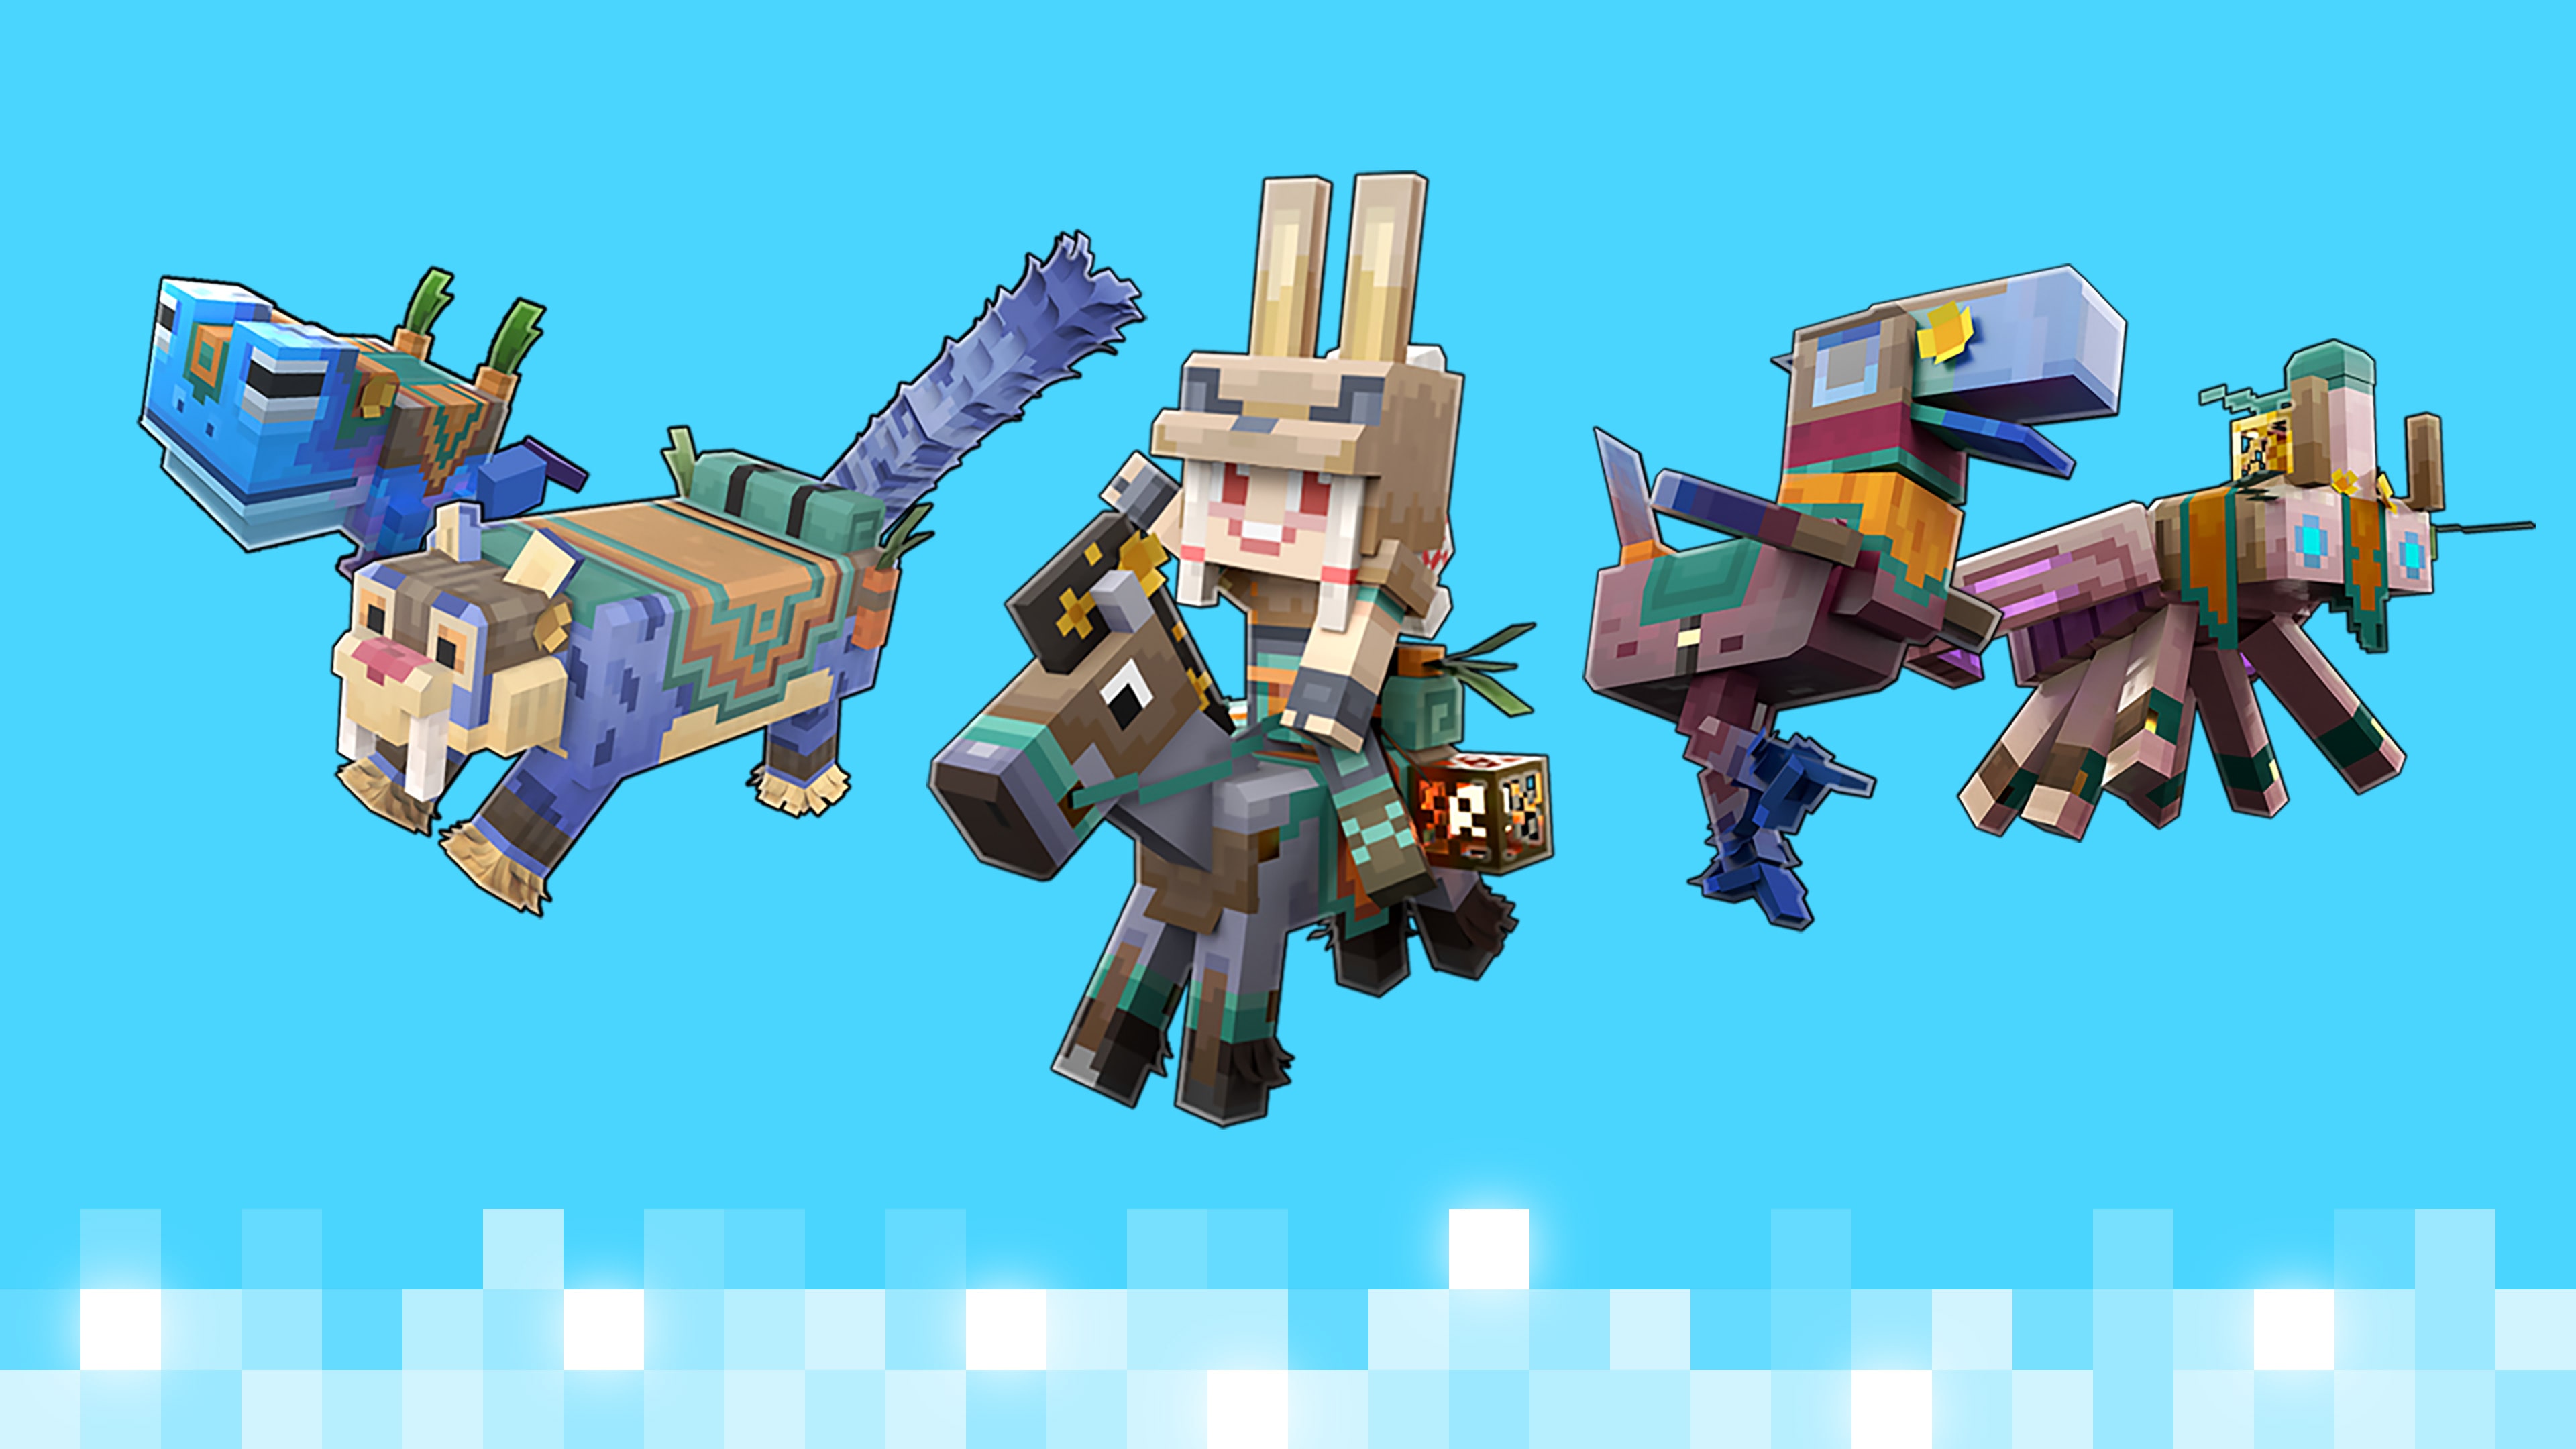 Heroes and Legends Skin Pack in Minecraft